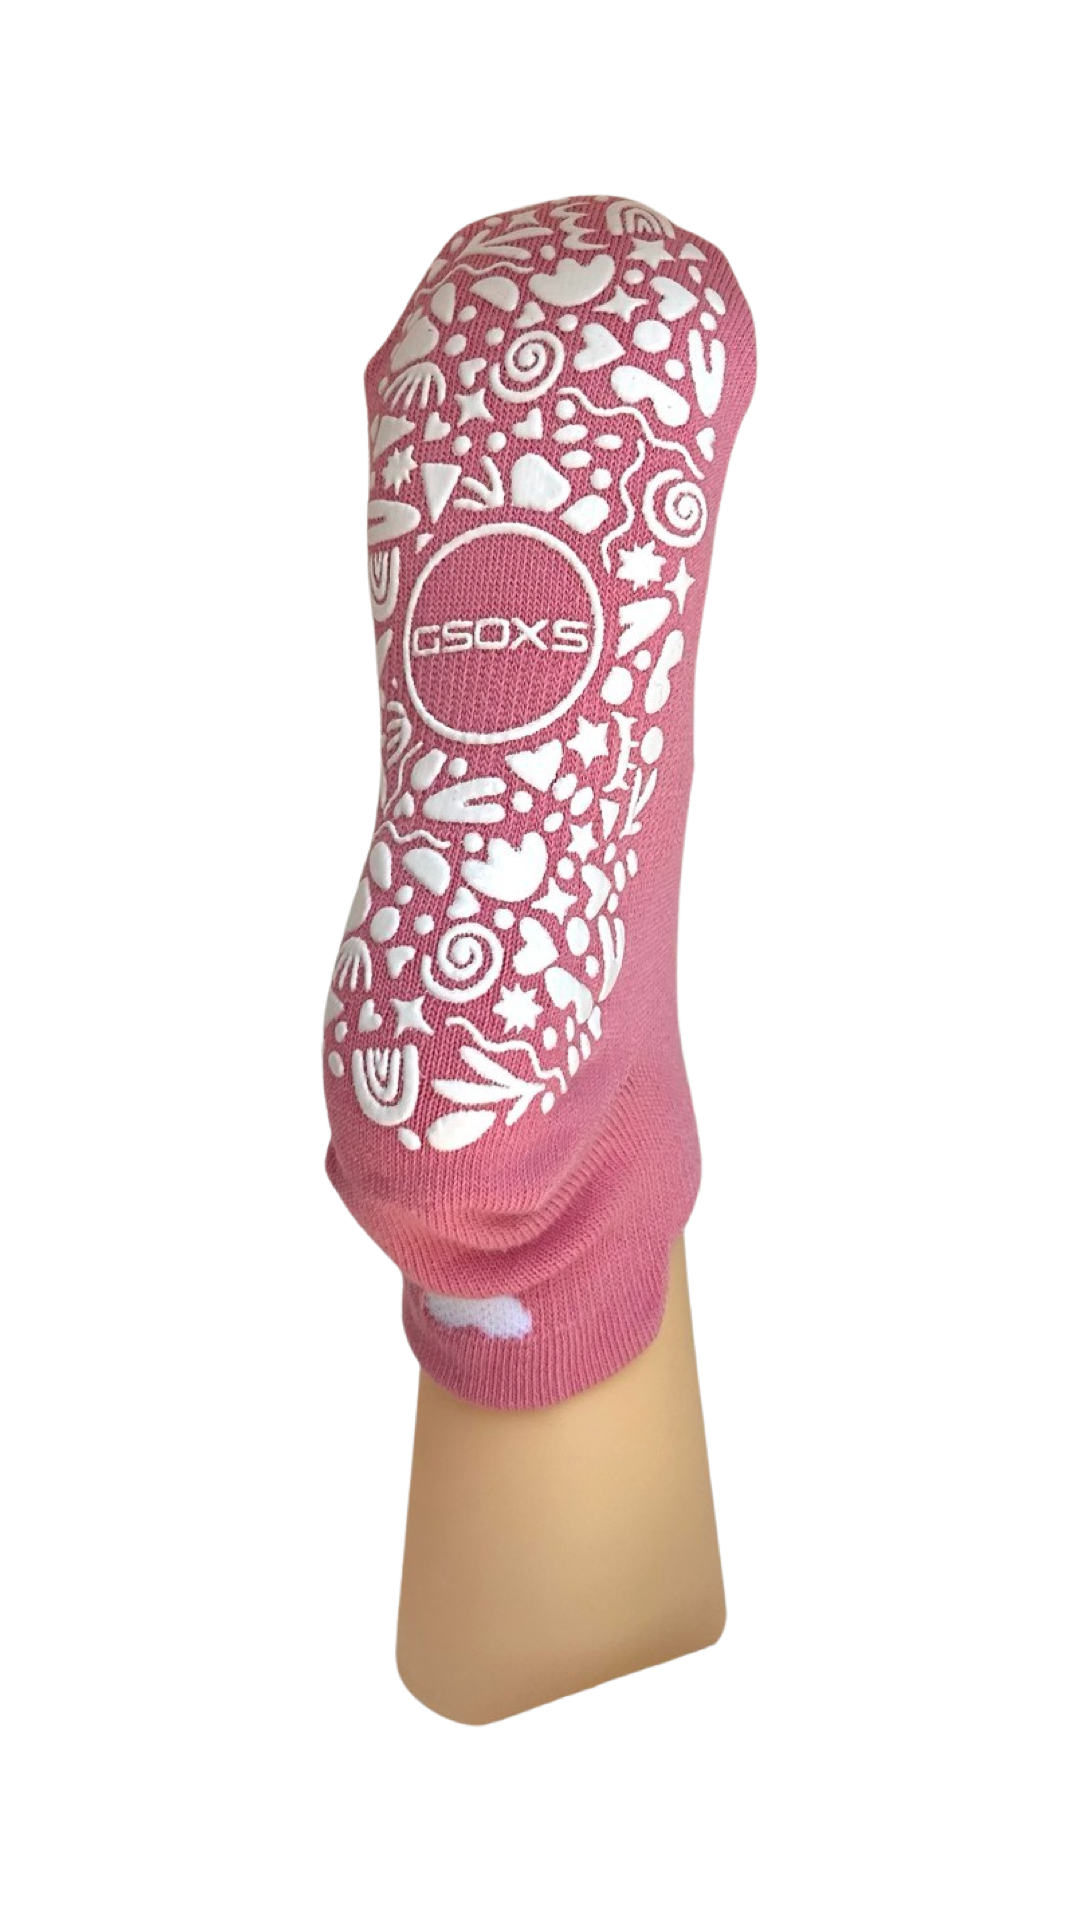 ‘you are beautiful’ (Pink) Grip Socks